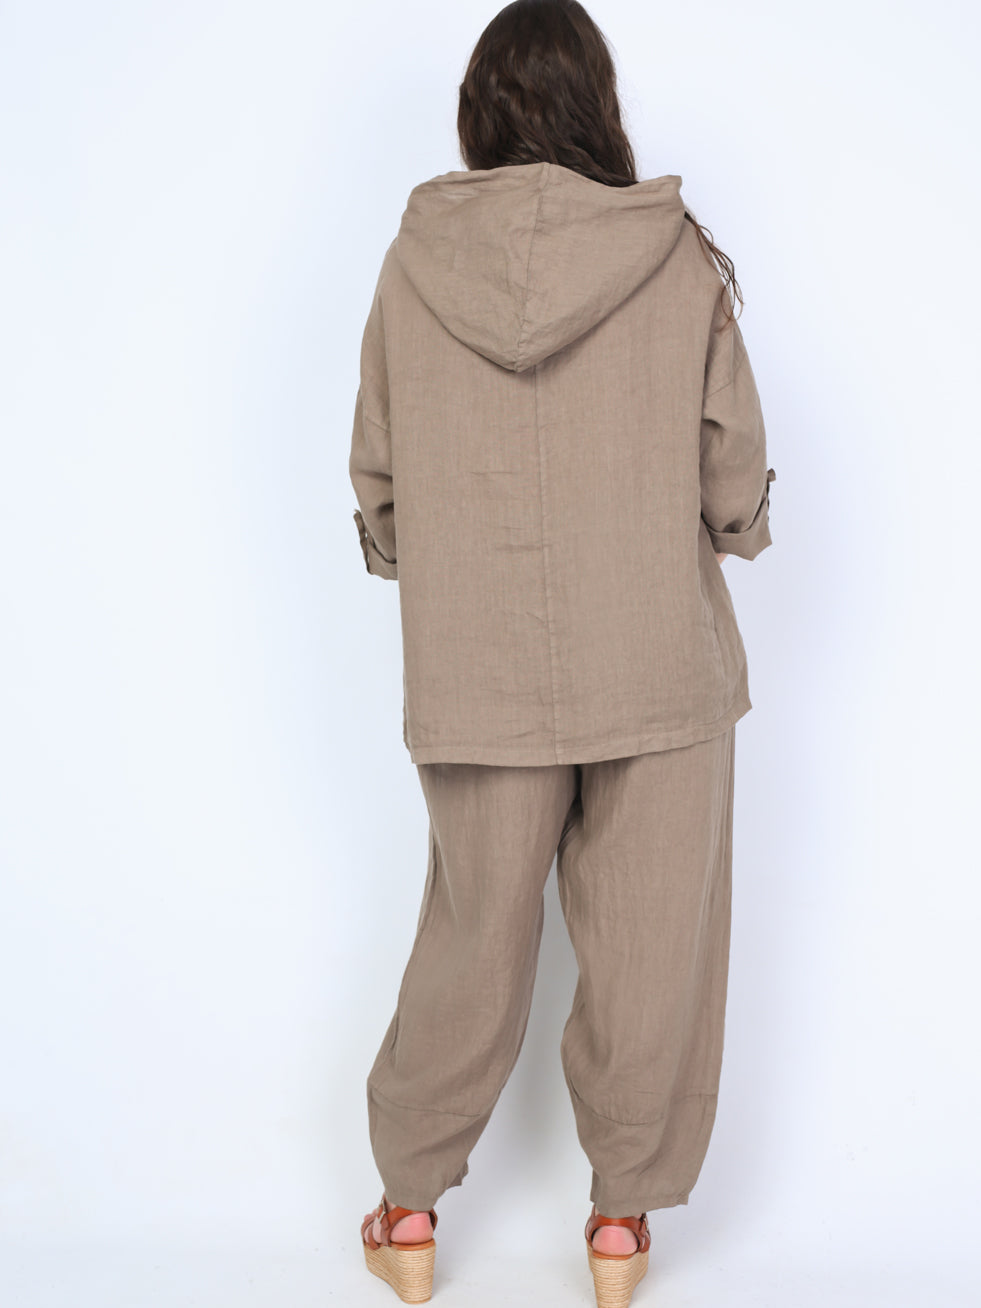 Krone 1 linen blouse with hood